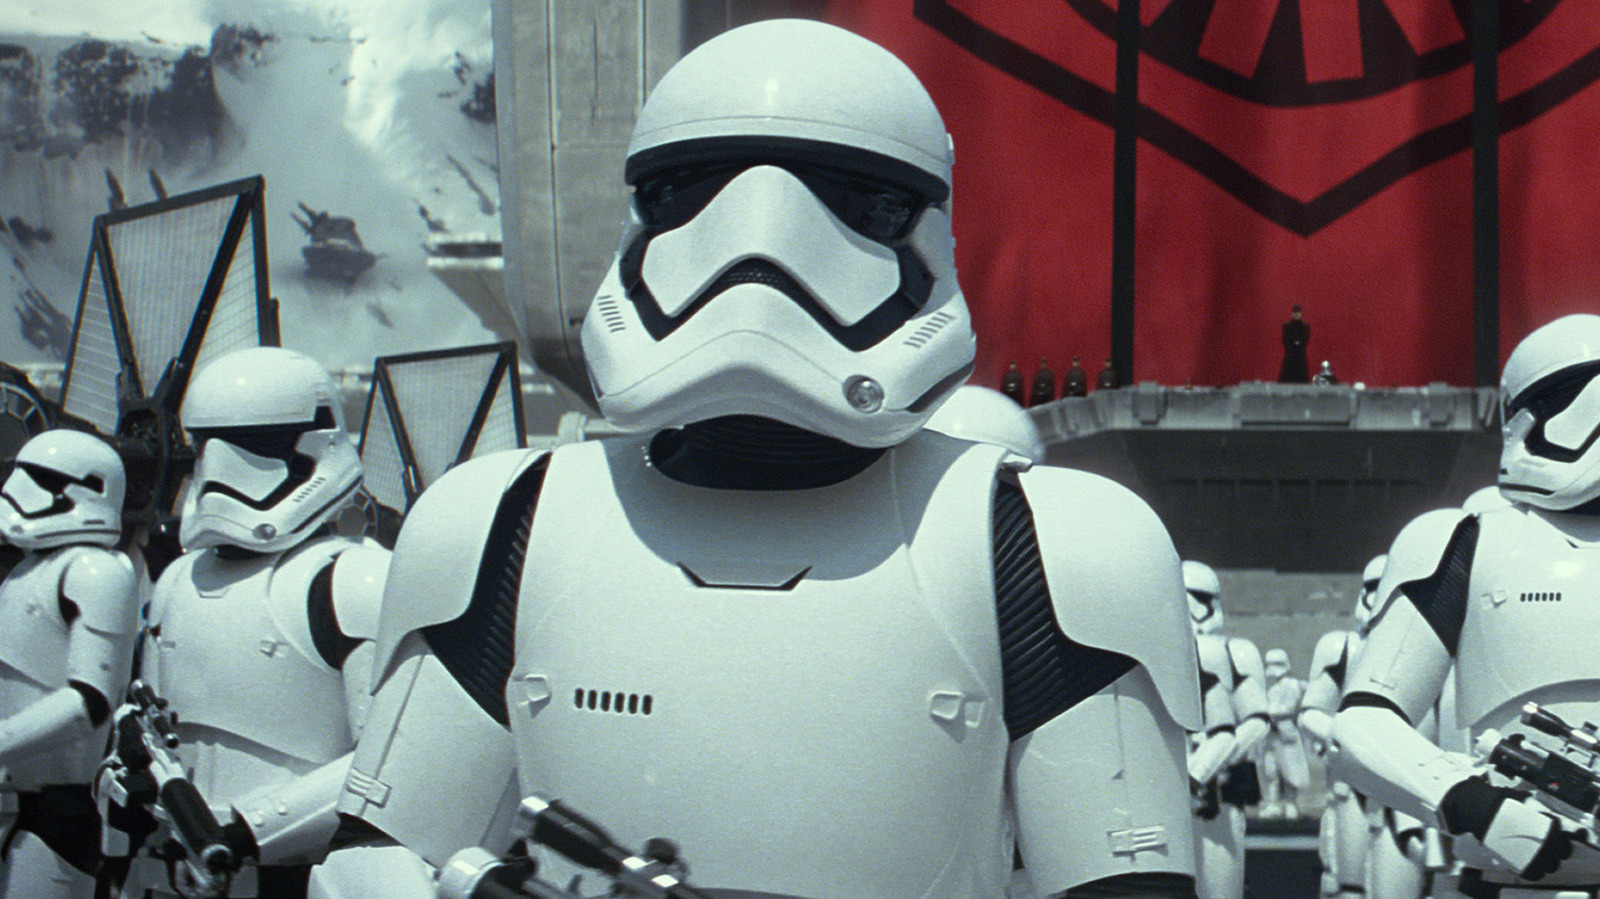 Starkiller returns and a Scout Trooper helmet is revealed with